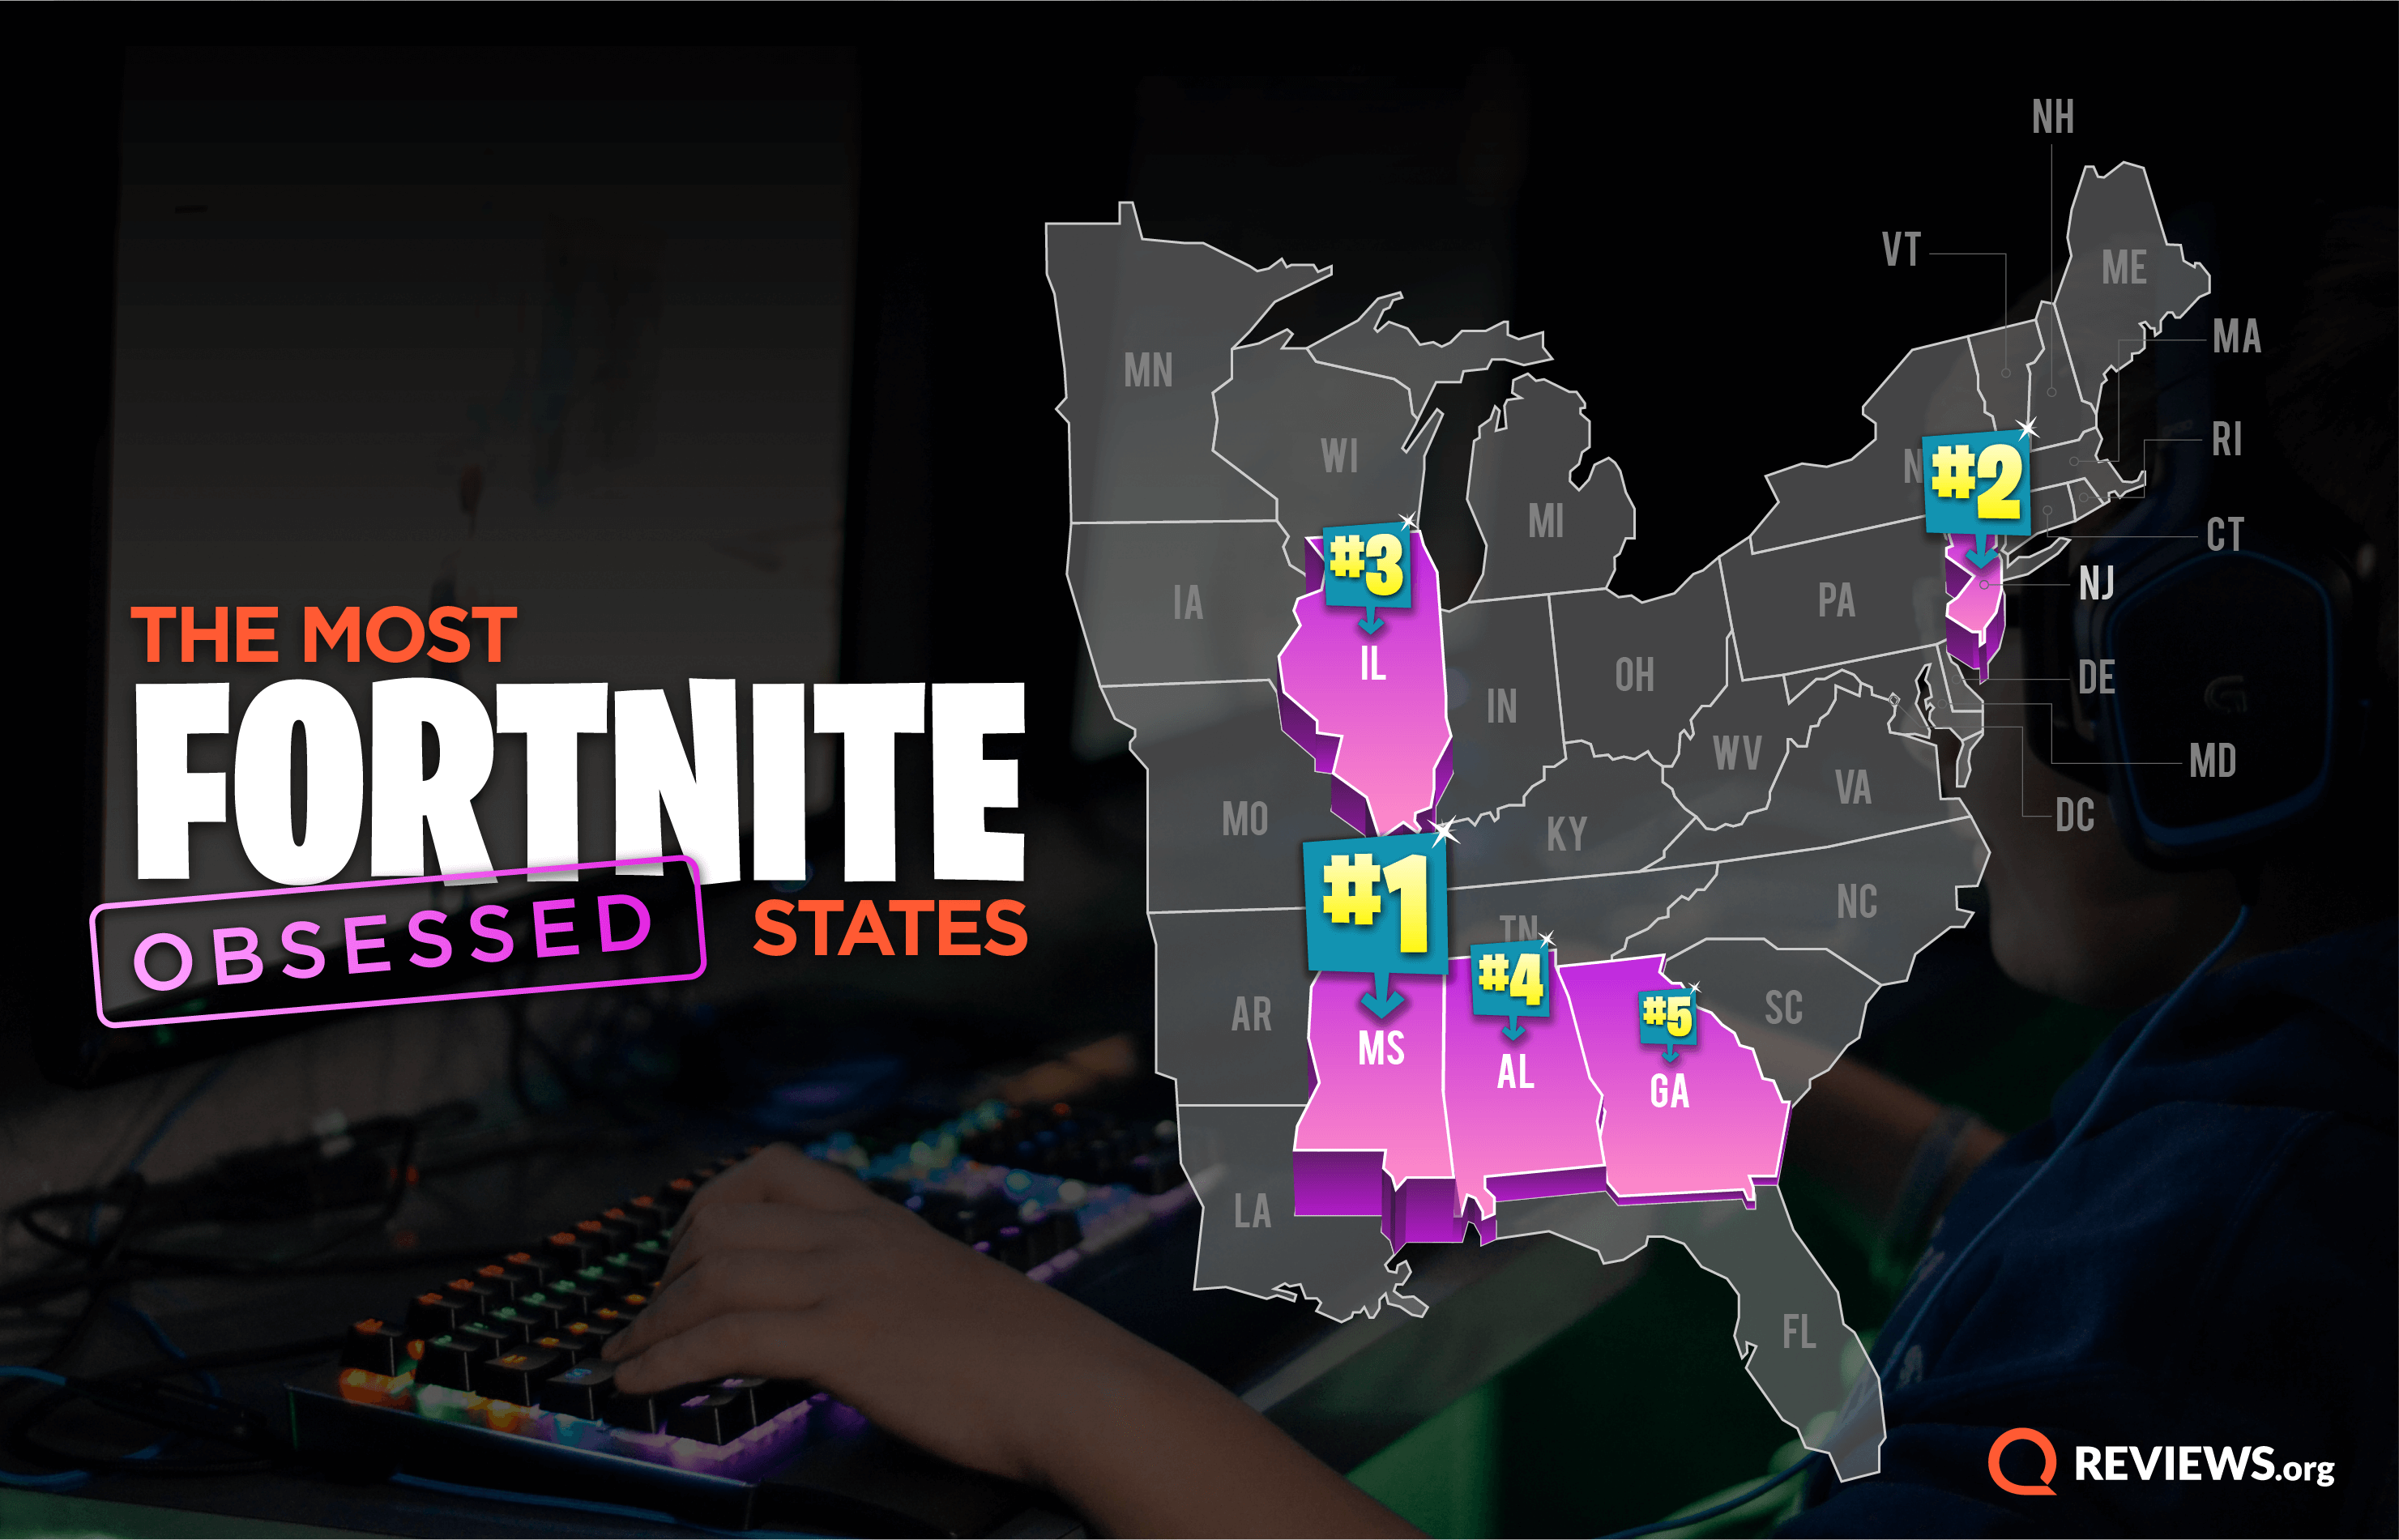 2019 S Most Fortnite Obsessed States Basically Everybody